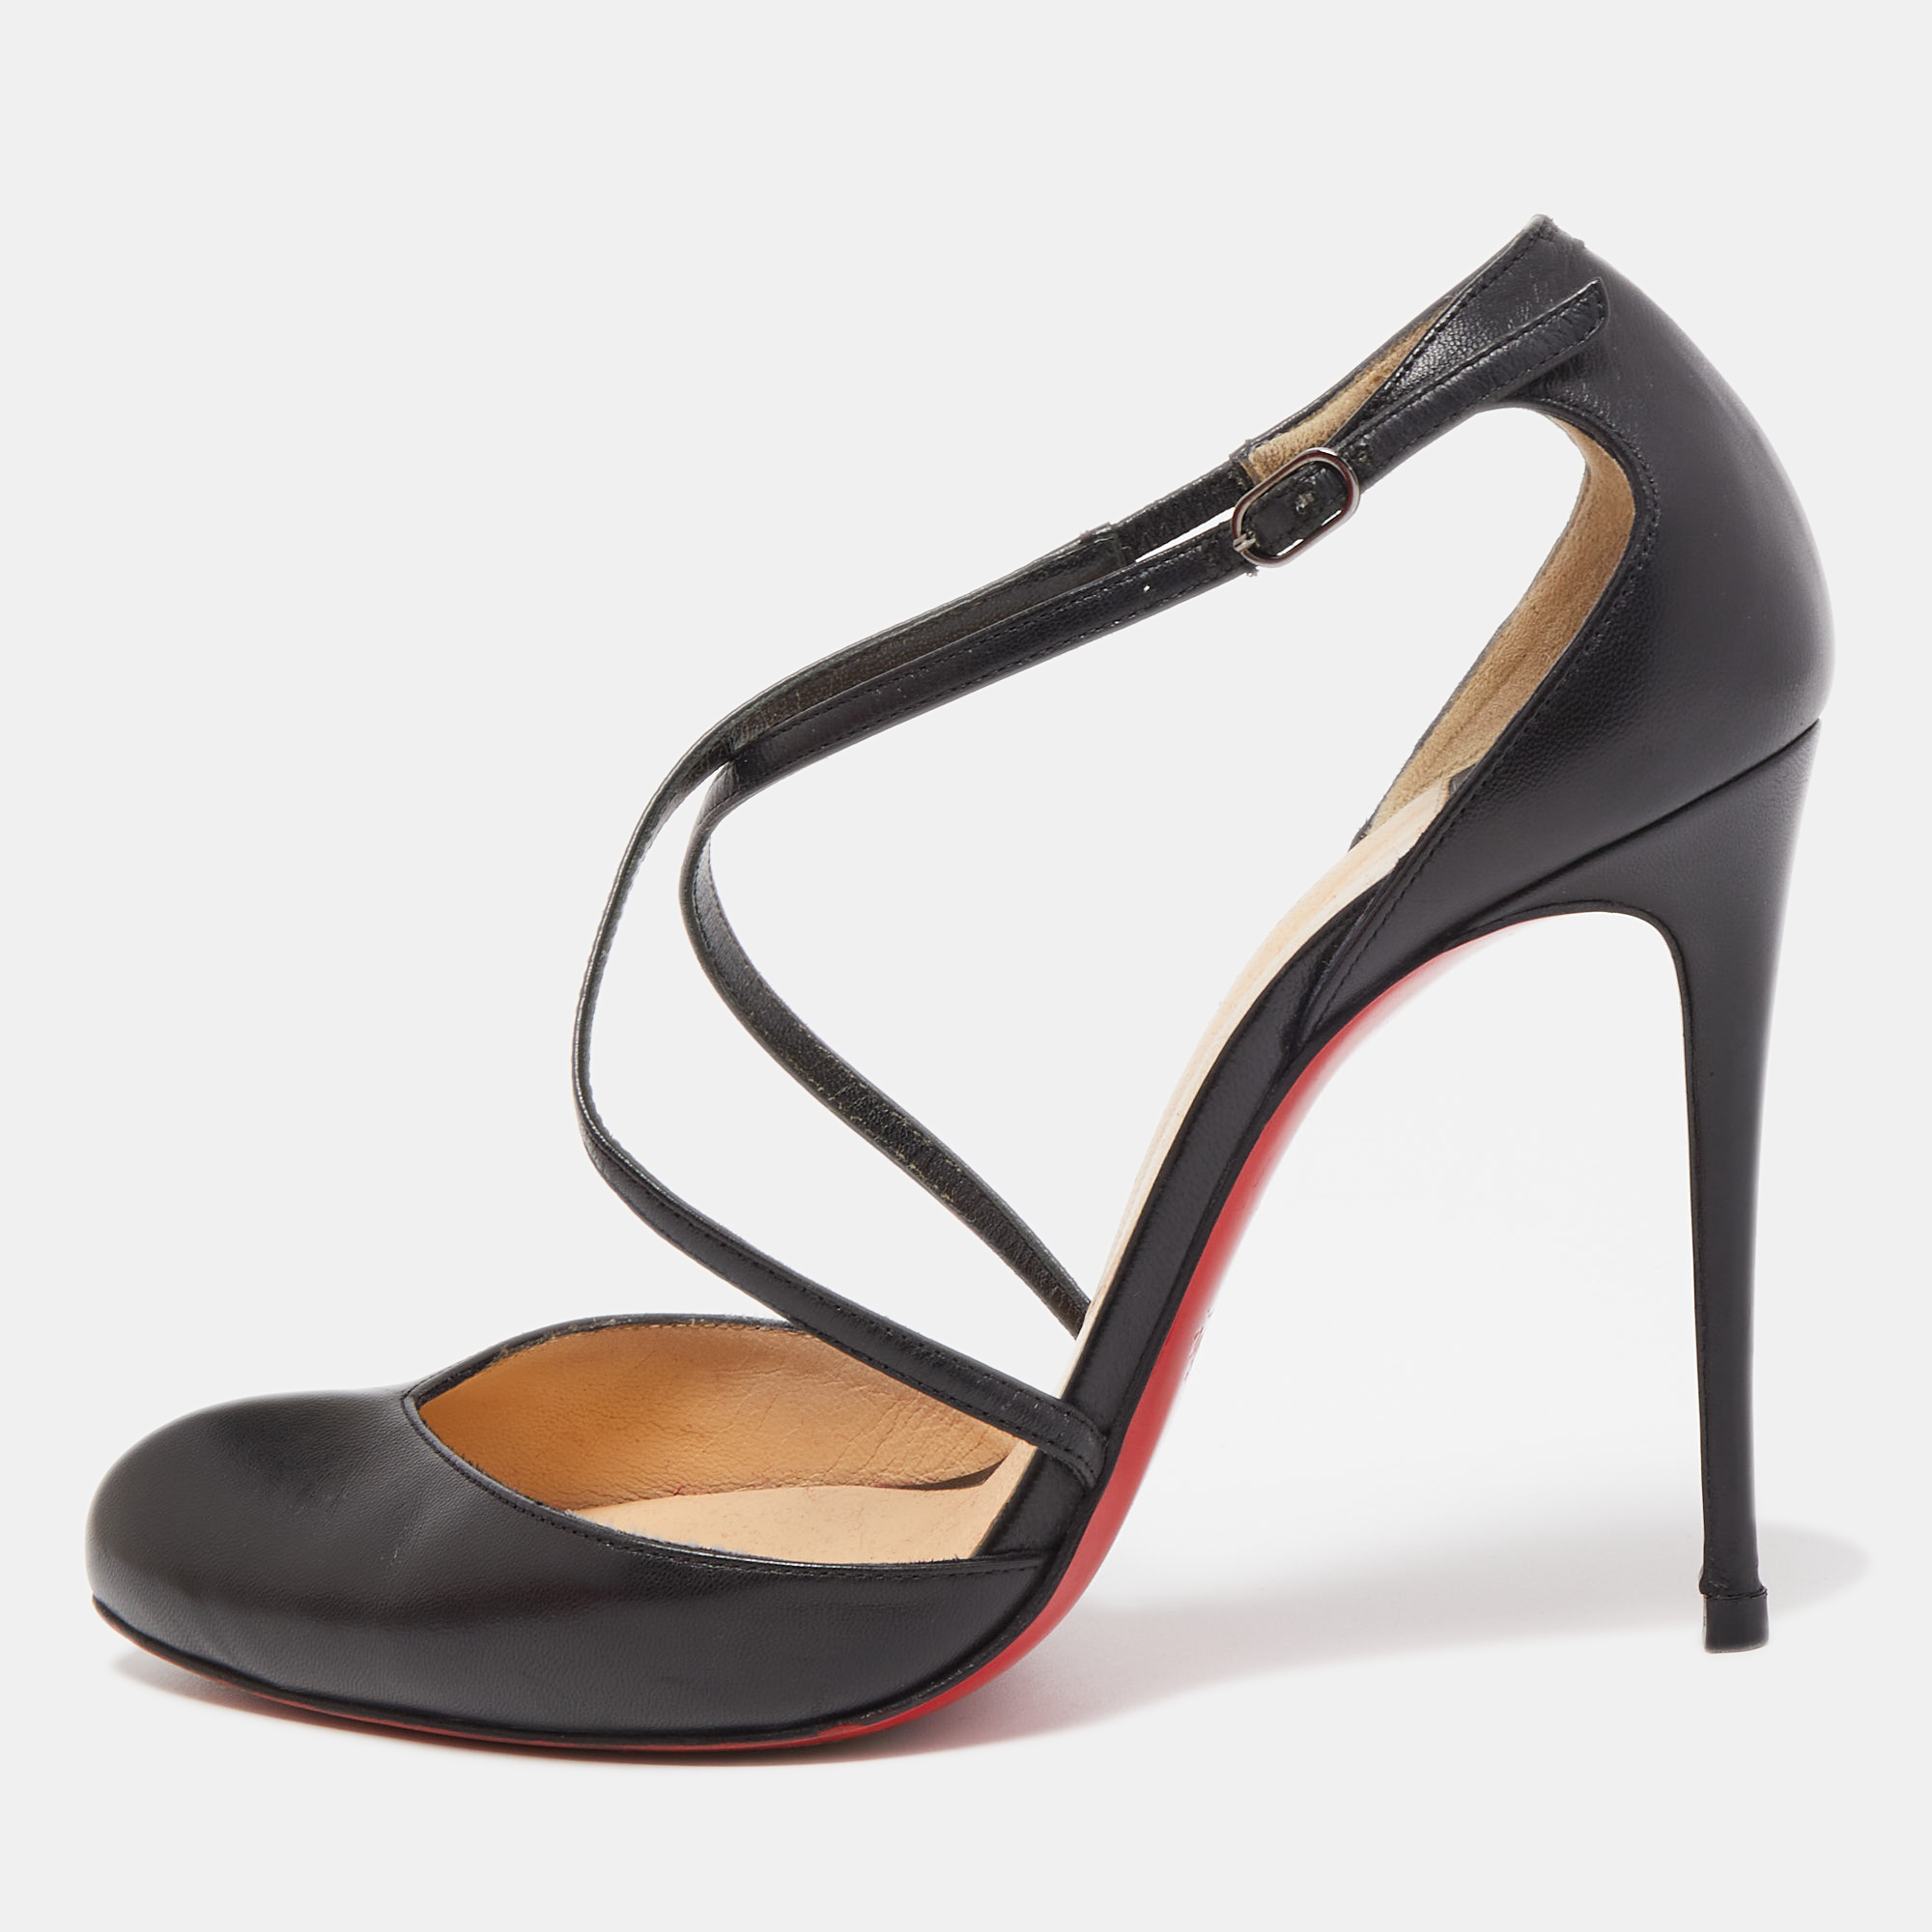 These pumps from Christian Louboutin are meant to be a loved choice. Wonderfully crafted and balanced on sleek heels the pumps will lift your feet in a stunning silhouette.